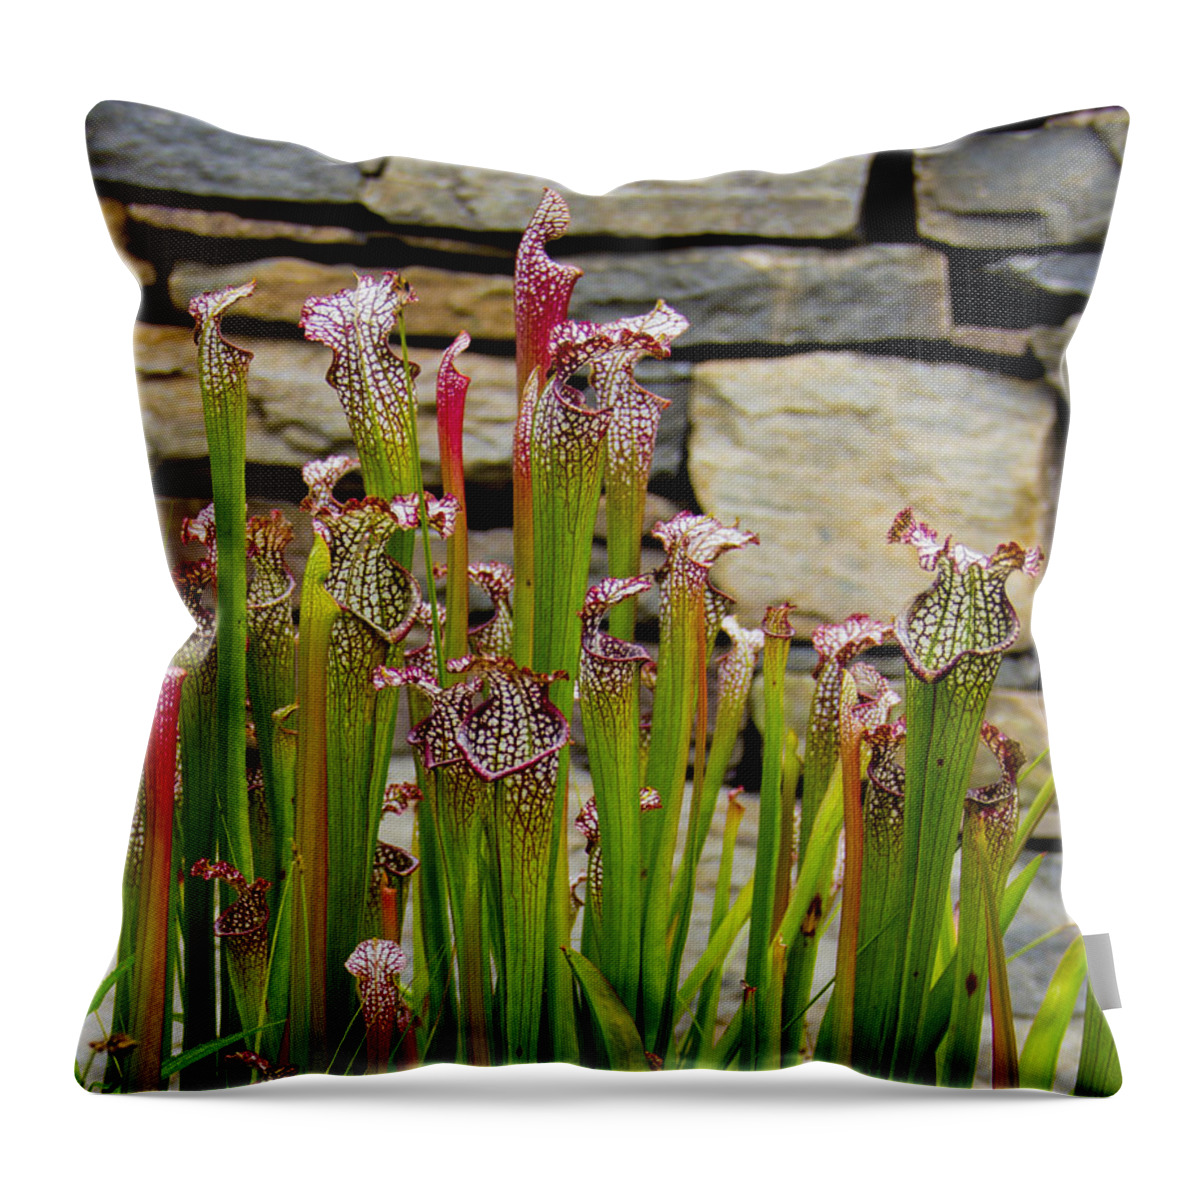 Plant Throw Pillow featuring the photograph Pitcher Plant by Allen Nice-Webb